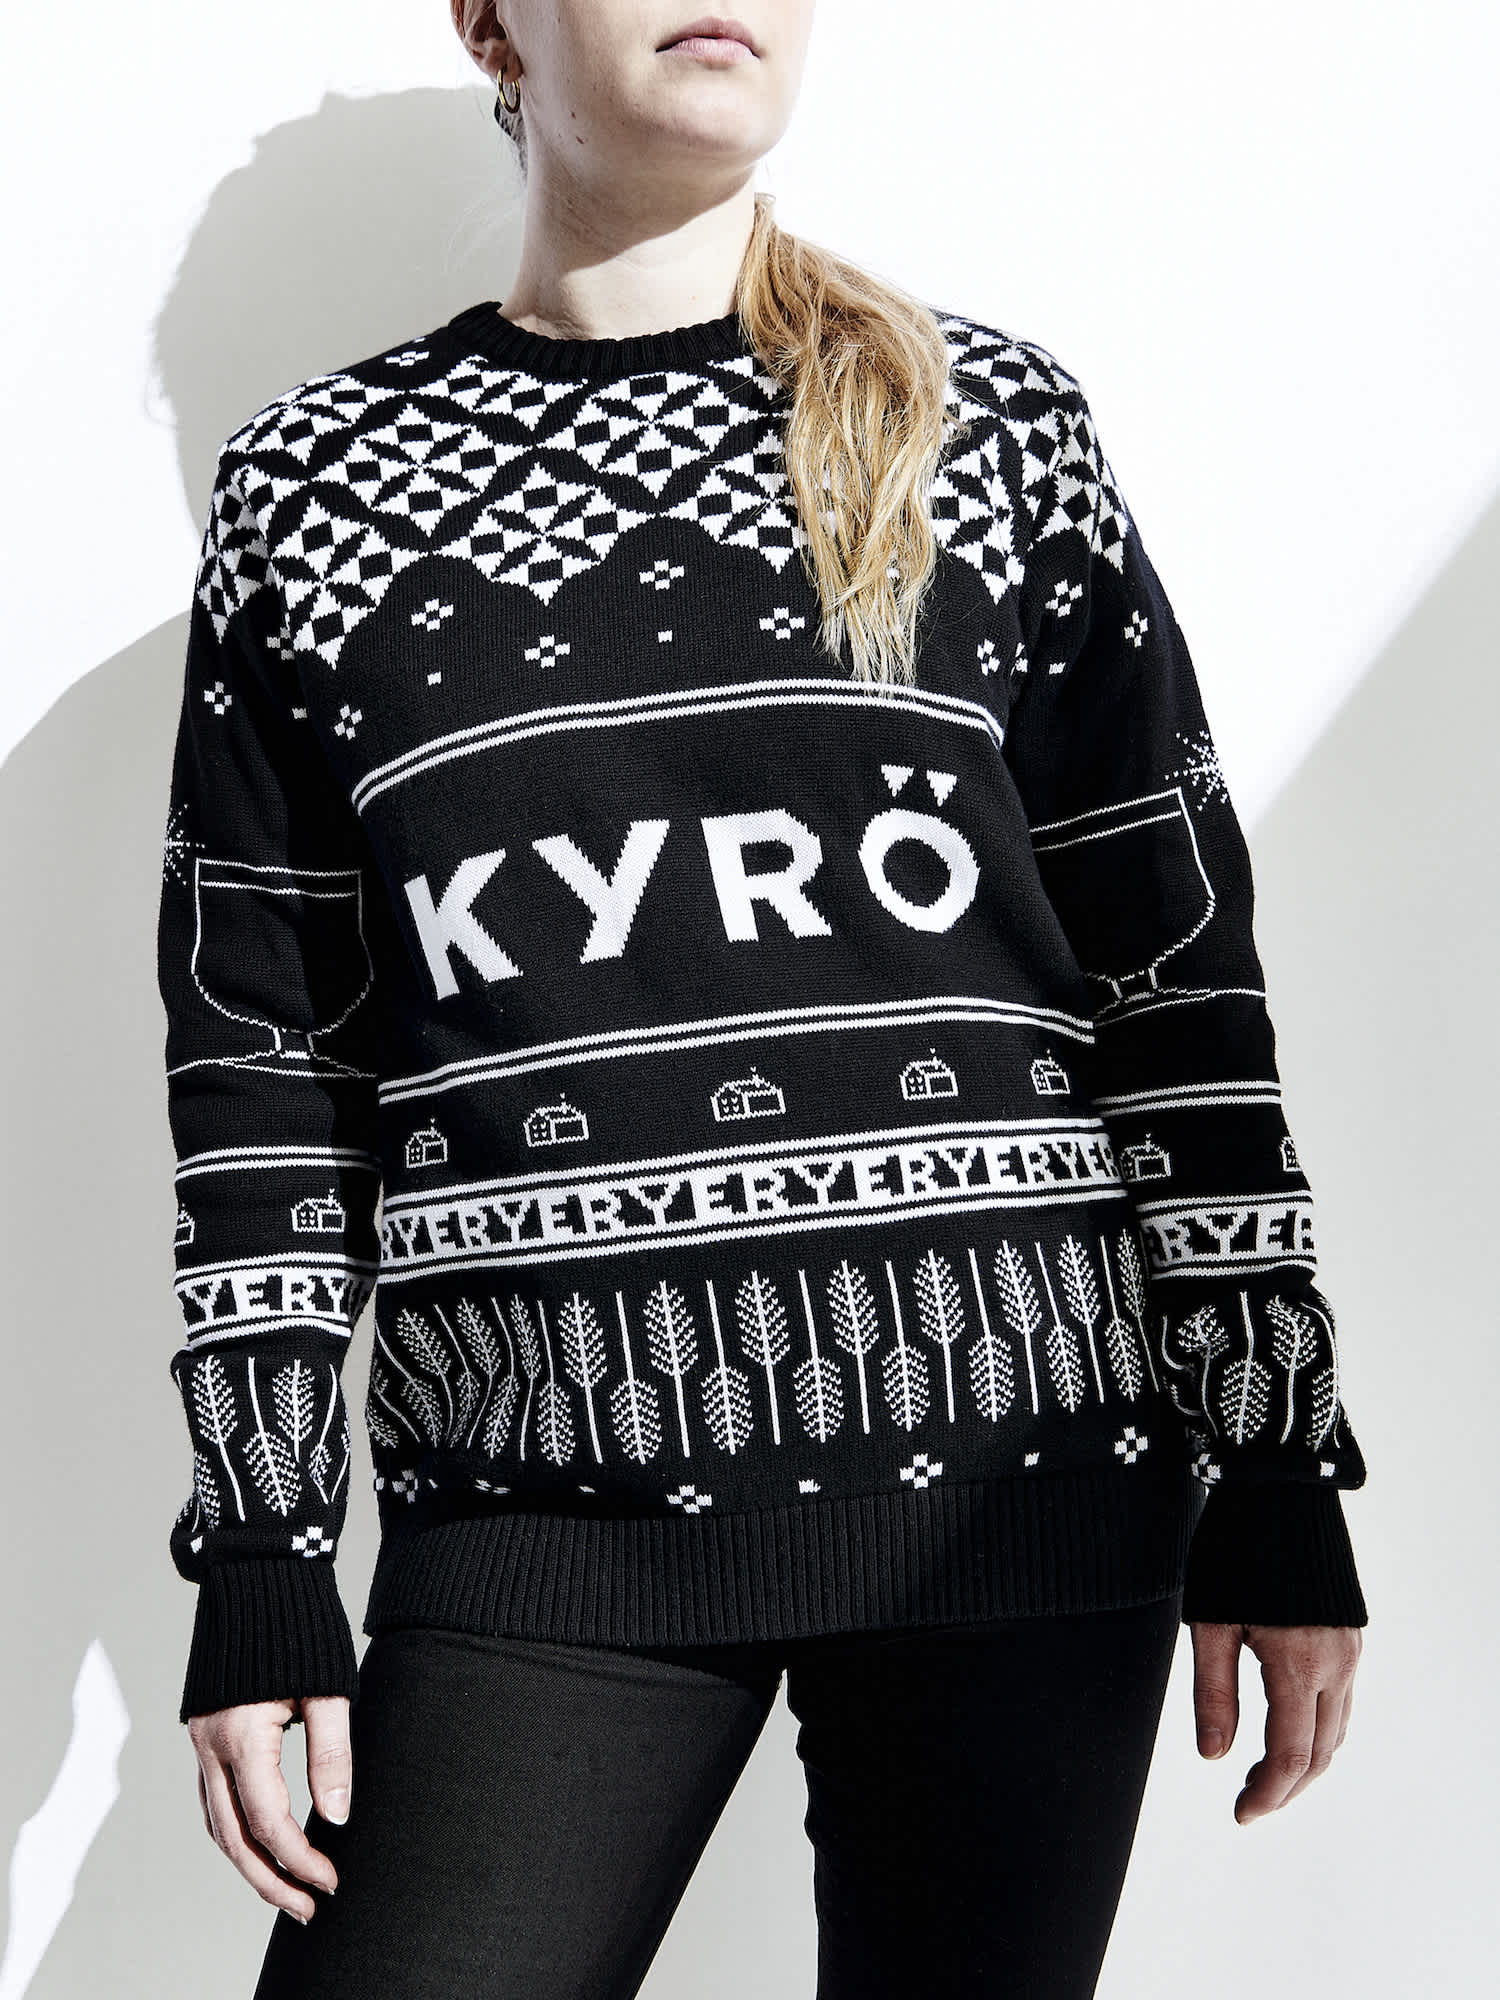 White, female model wearing a black sweater decorated in white, graphic, Christmas illustrations and a big, large Kyrö logo across the chest. 